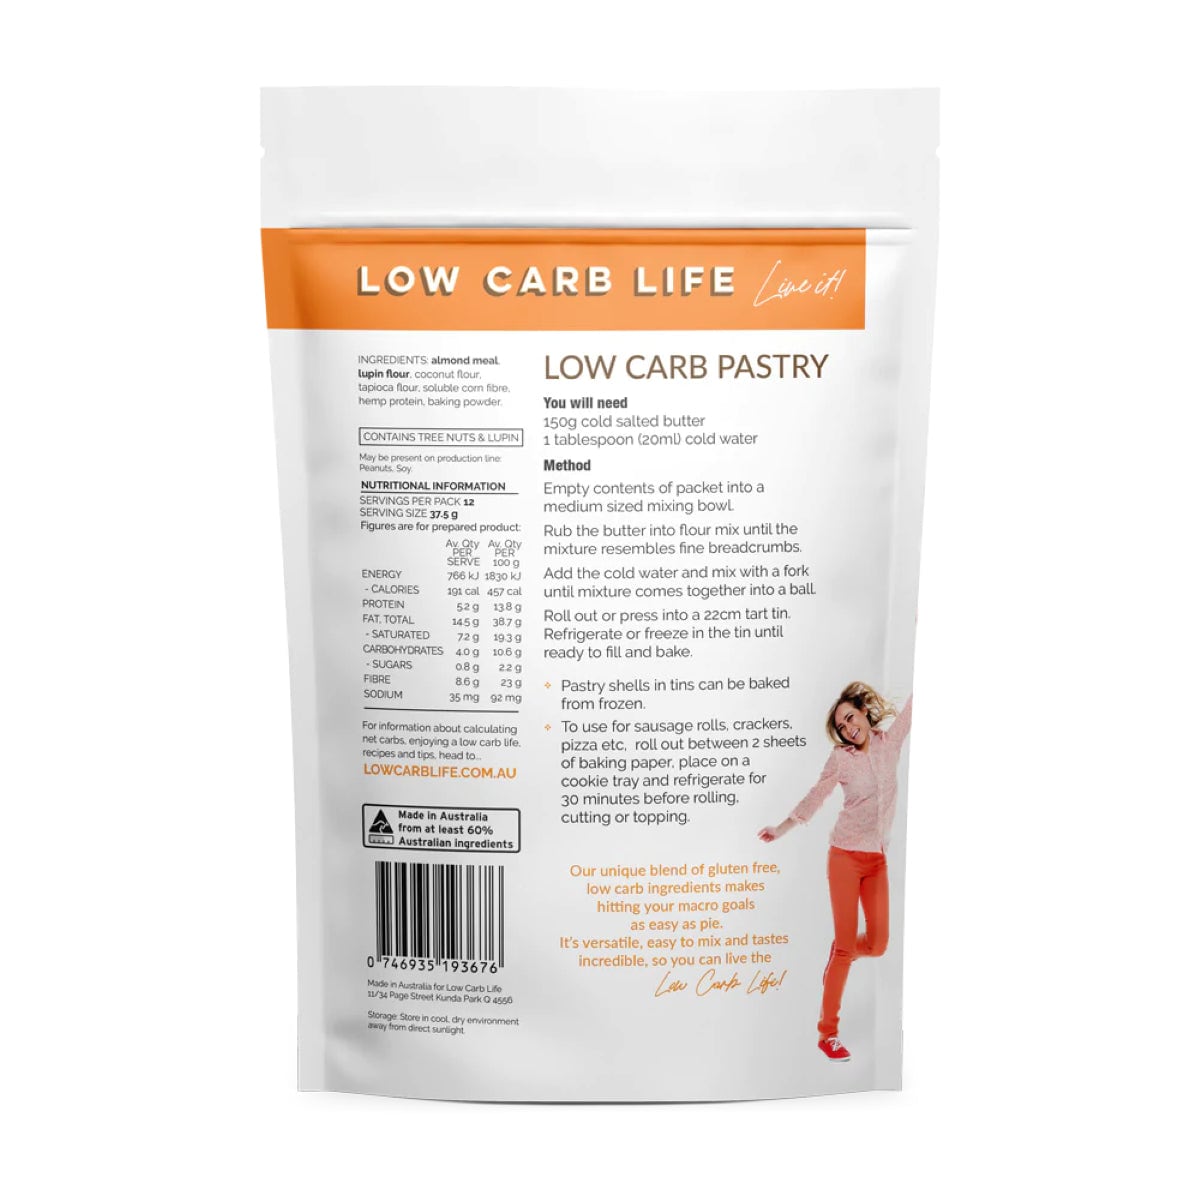 Low Carb Life Keto Bake Mix Low Carb Pastry Mix 300g